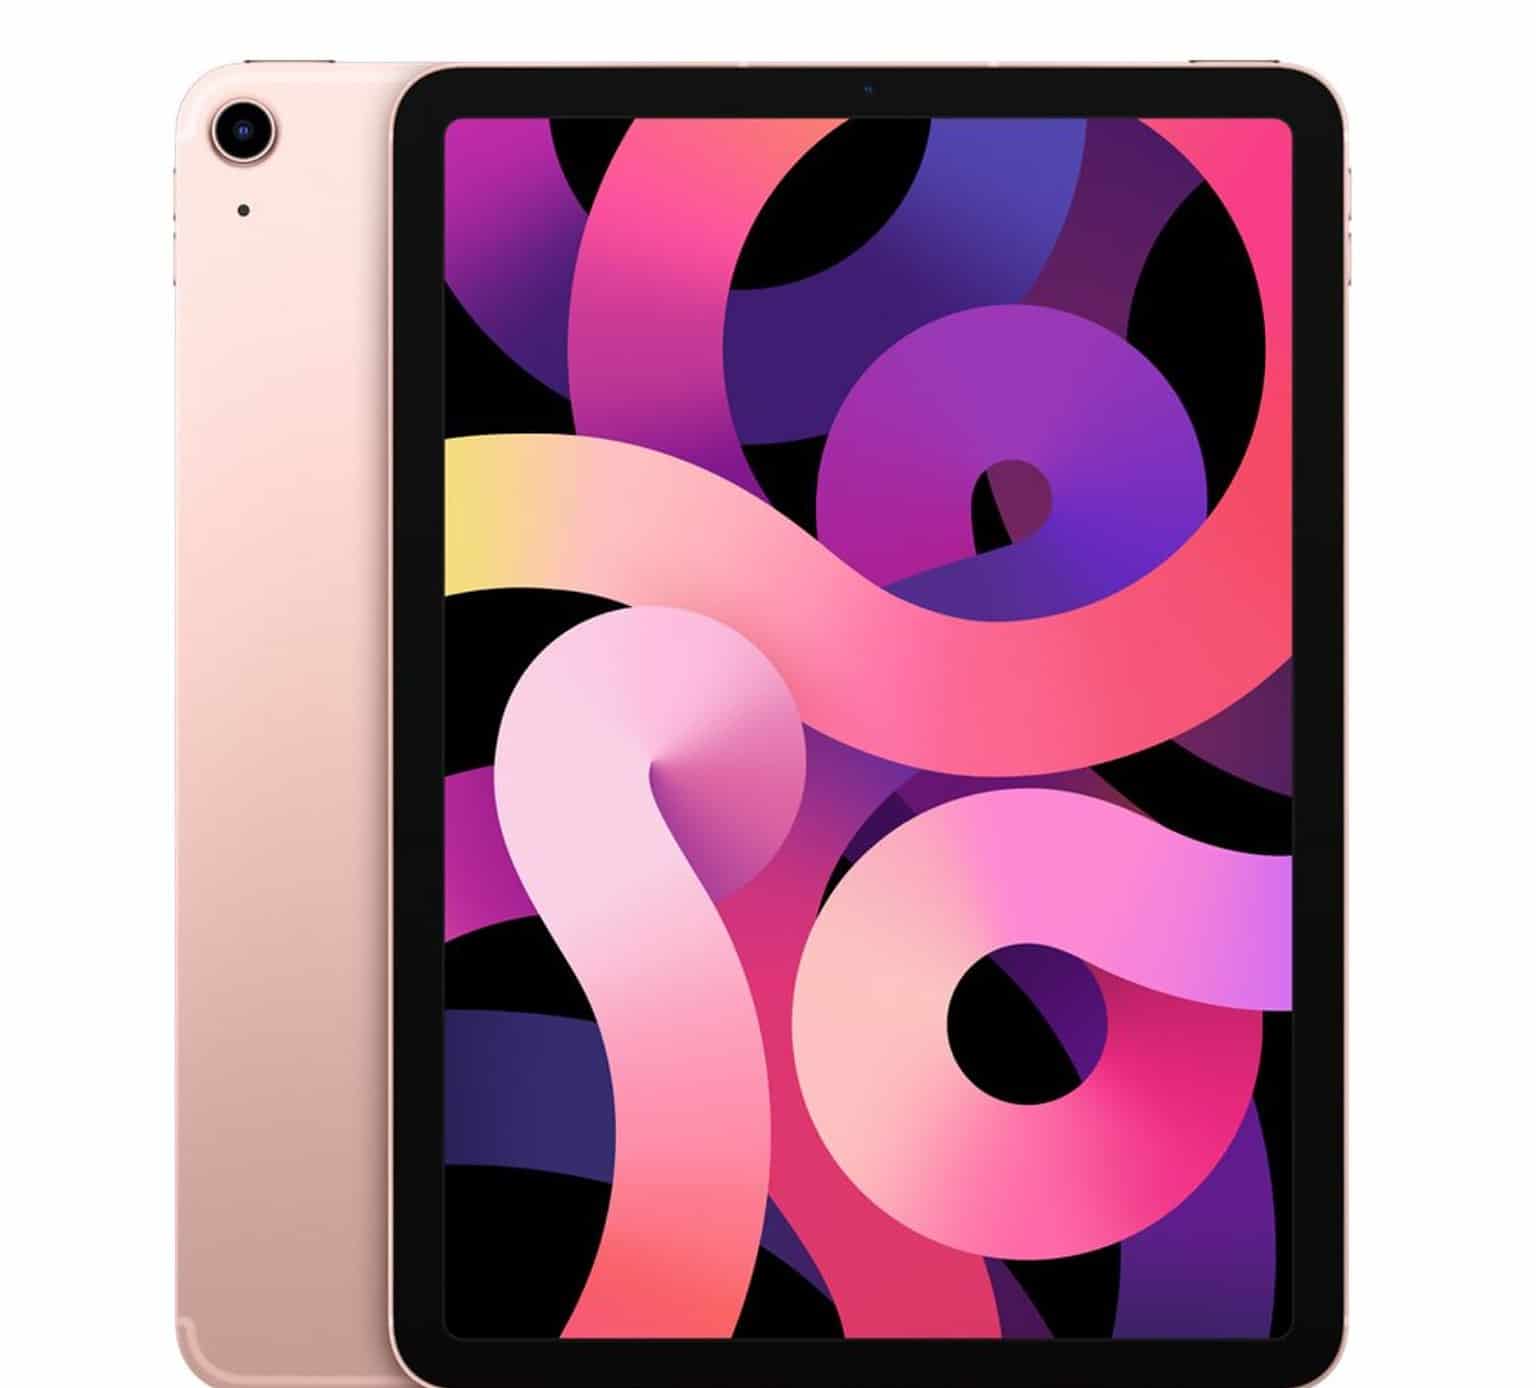 The new Apple iPad Air 4th Gen comes with A14 Bionic processor, all